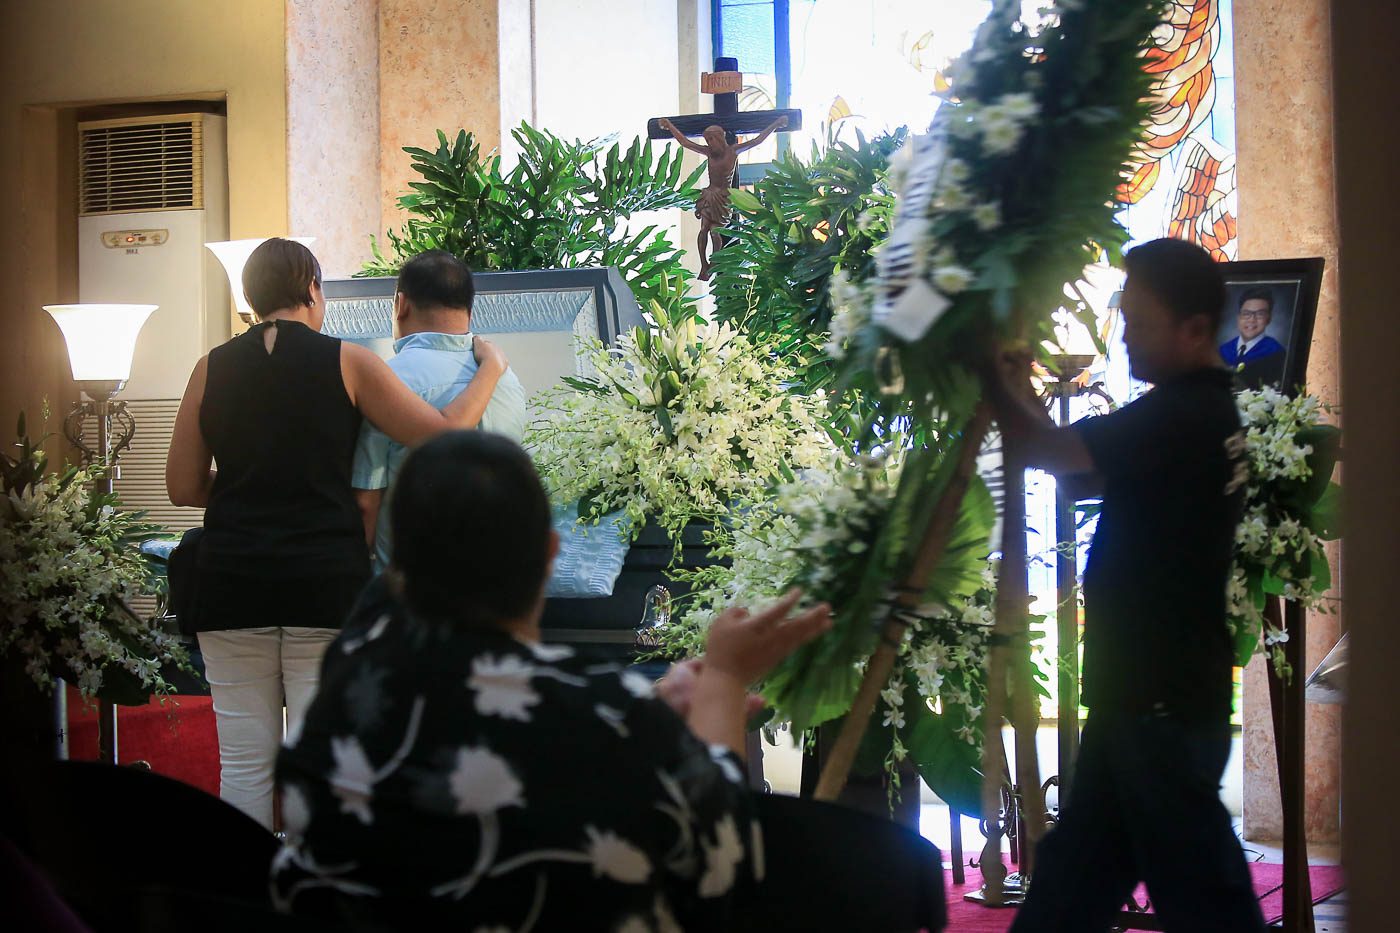 FATHER'S GRIEF. The father of slain UST Law freshman Horacio Castillo III mourns for his son at the Satuario de San Antonio Chapel in Forbes Park, Makati City on September 19, 2017. Photo by Ben Nabong/Rappler   